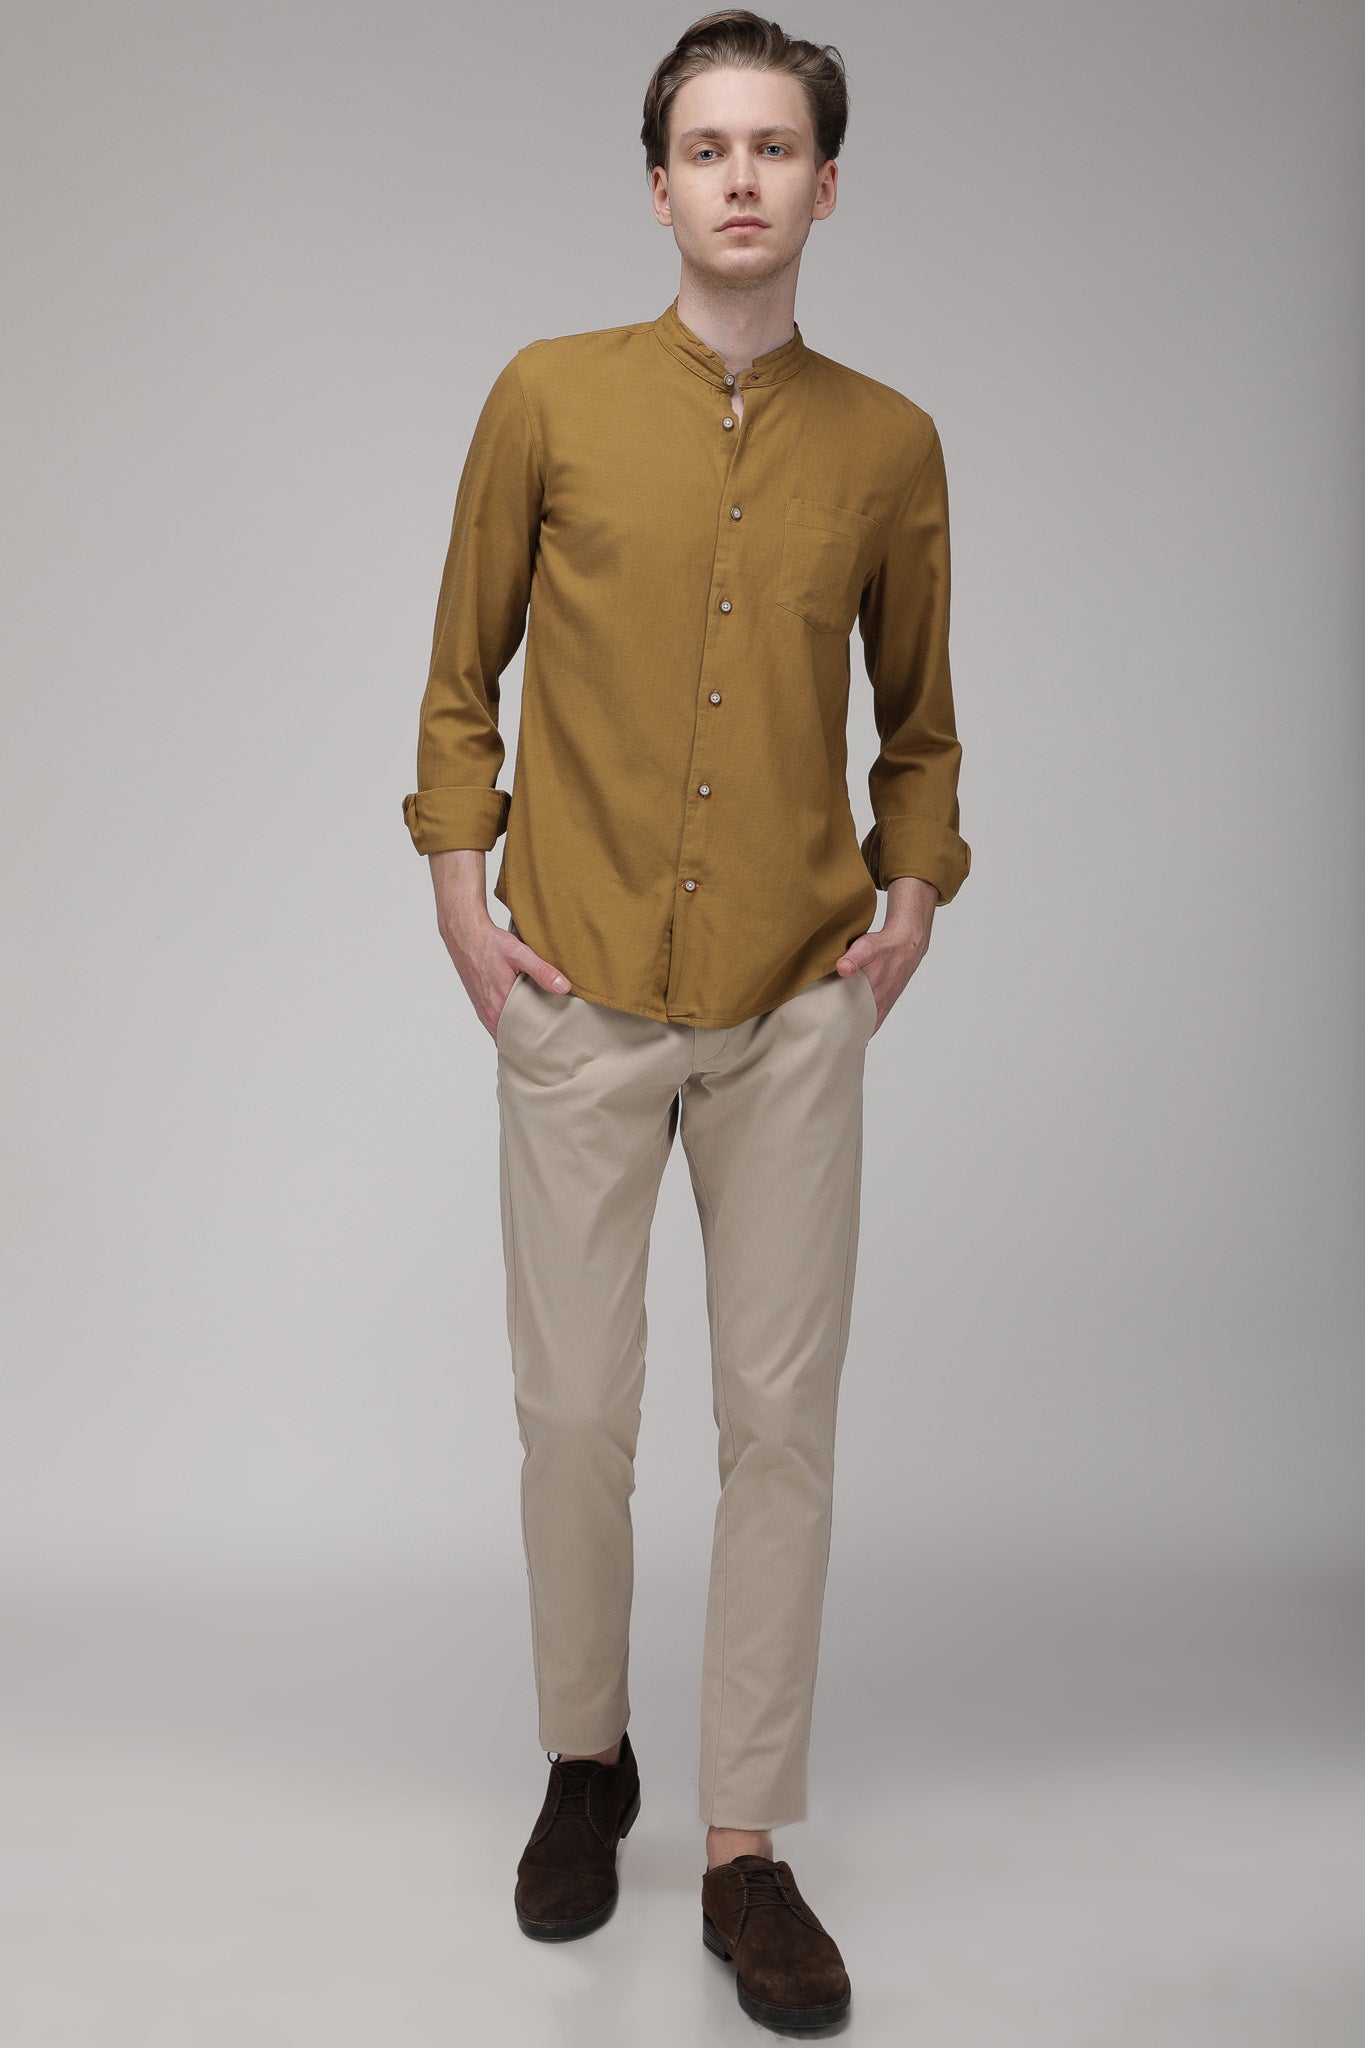 Bare Brown Mandarin Collar Cotton Linen Shirt, Slim Fit with Full Sleeves - Brown